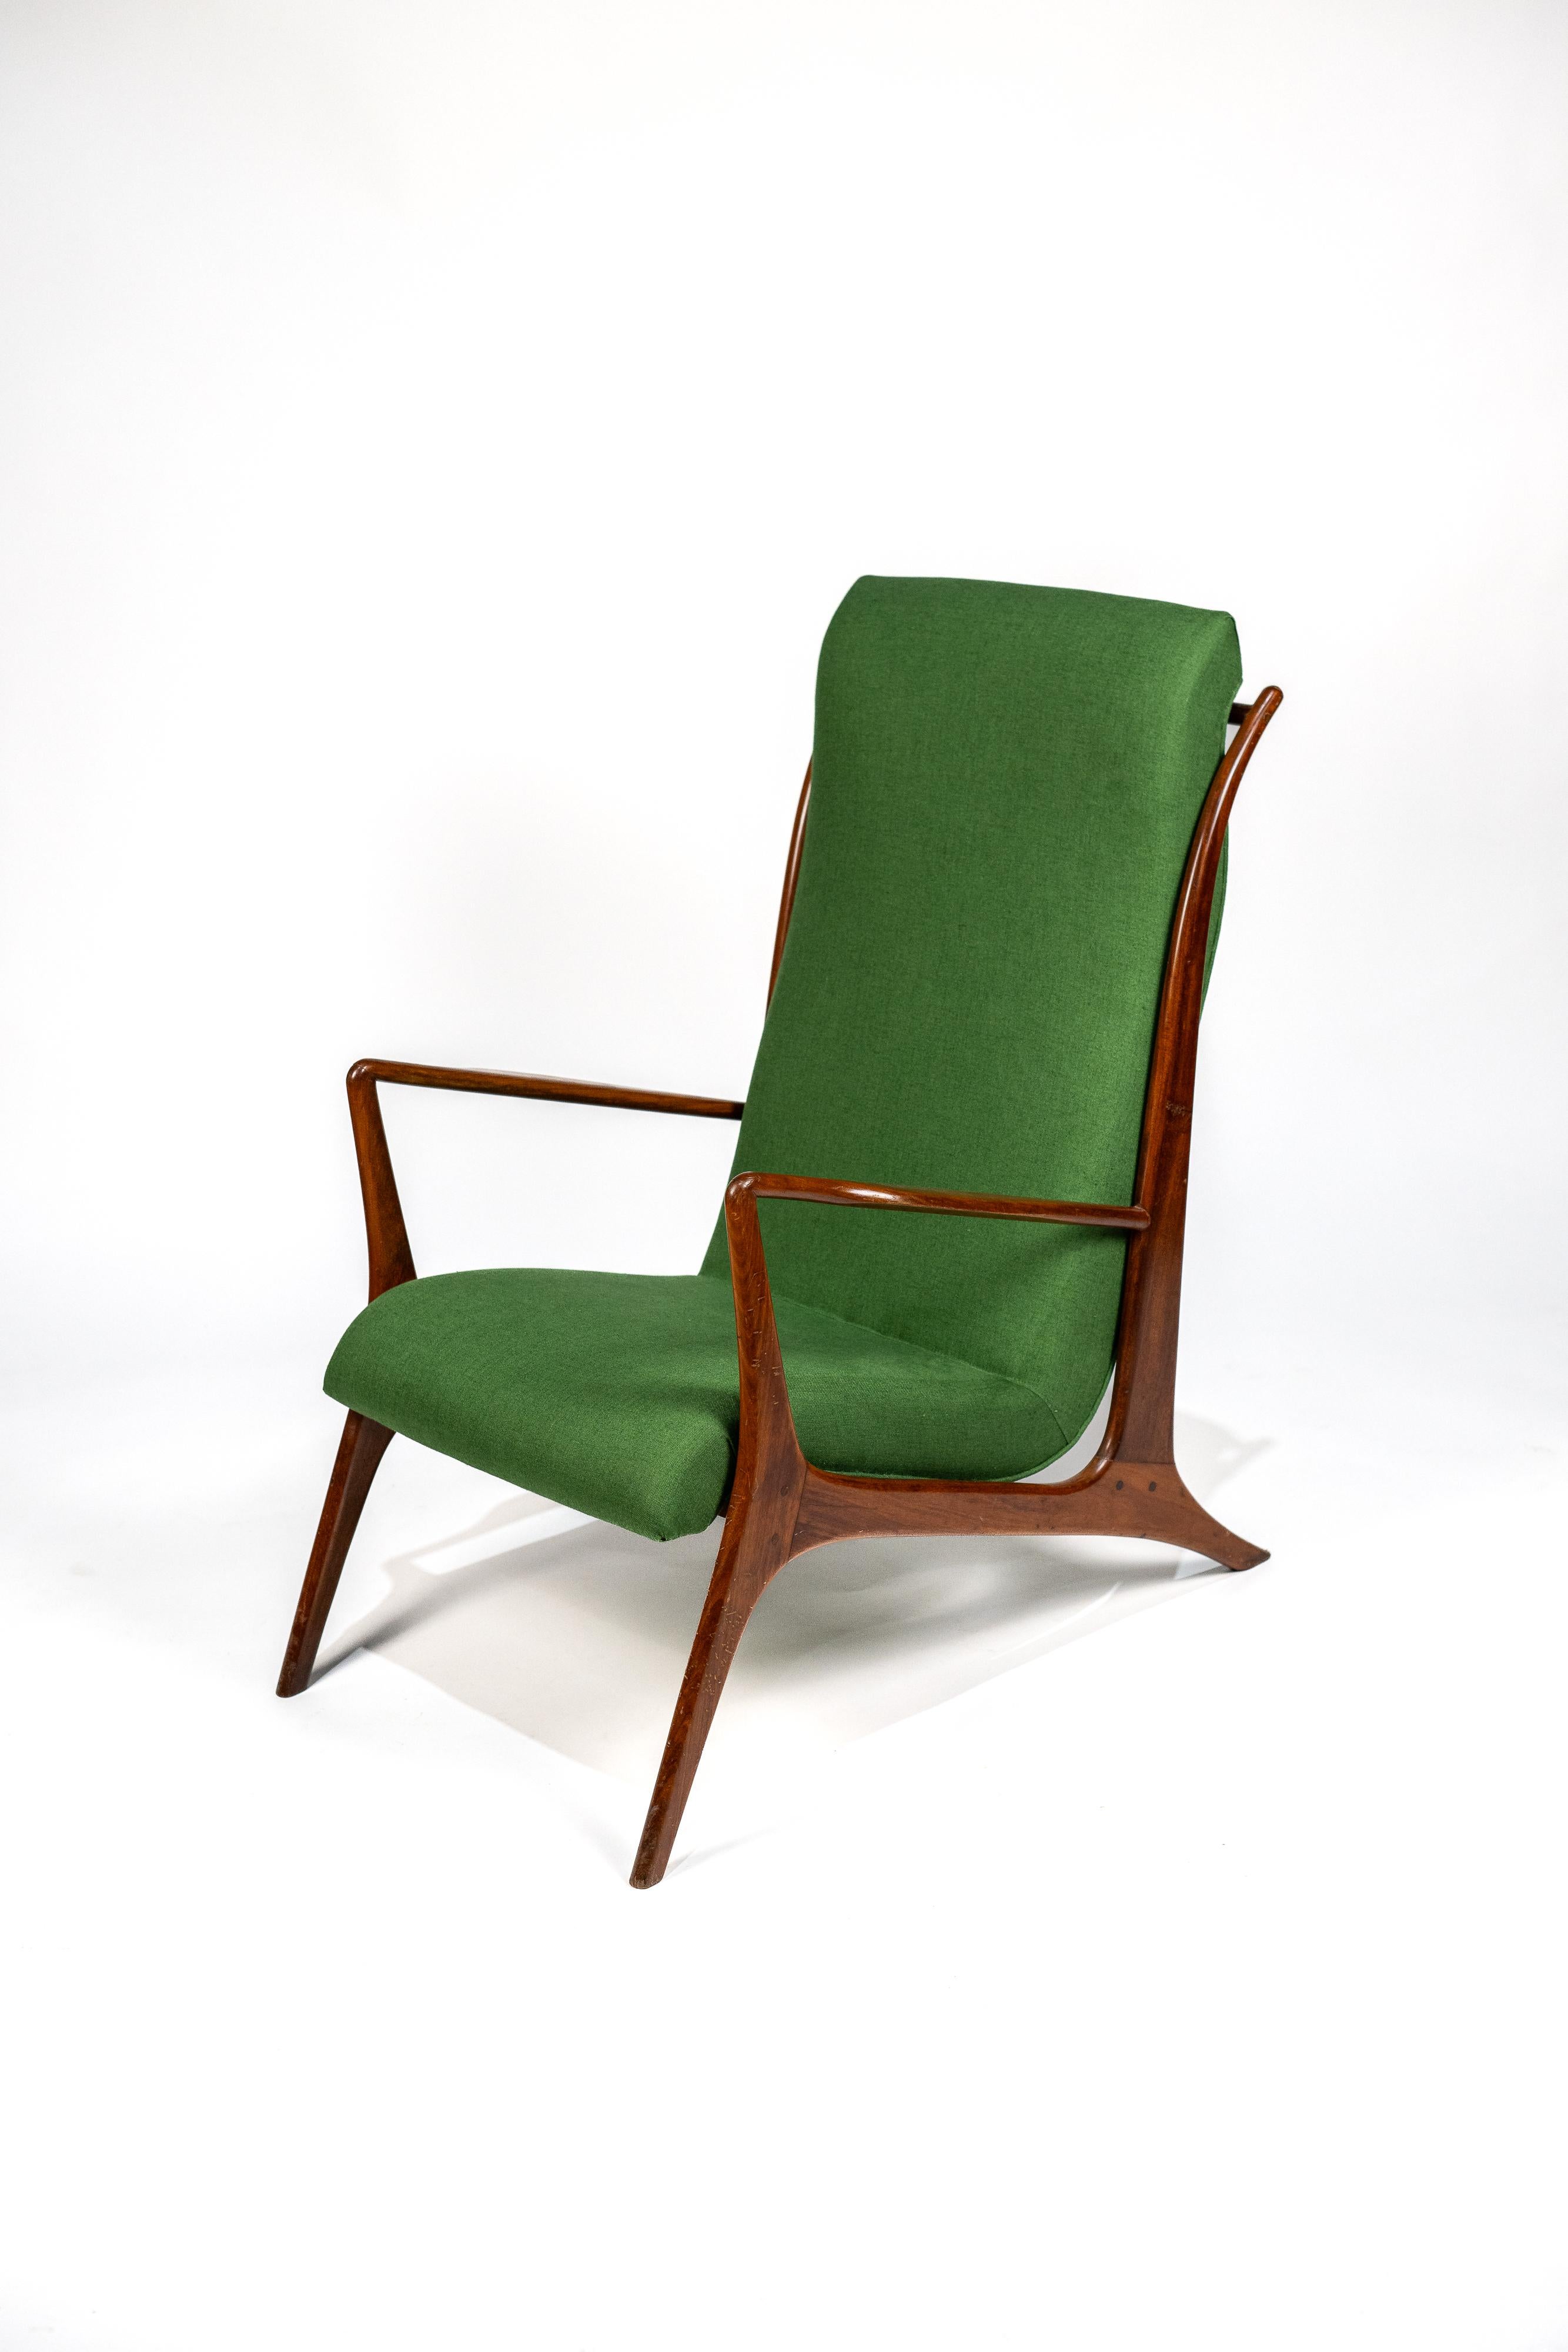 This armchair by John Graz, dating from the 1960s. The room is characterized by a high slightly inclined backrest, offering optimal comfort. Its contoured structure in caviuna, an exotic wood, gives the whole a timeless elegance.

The seat and